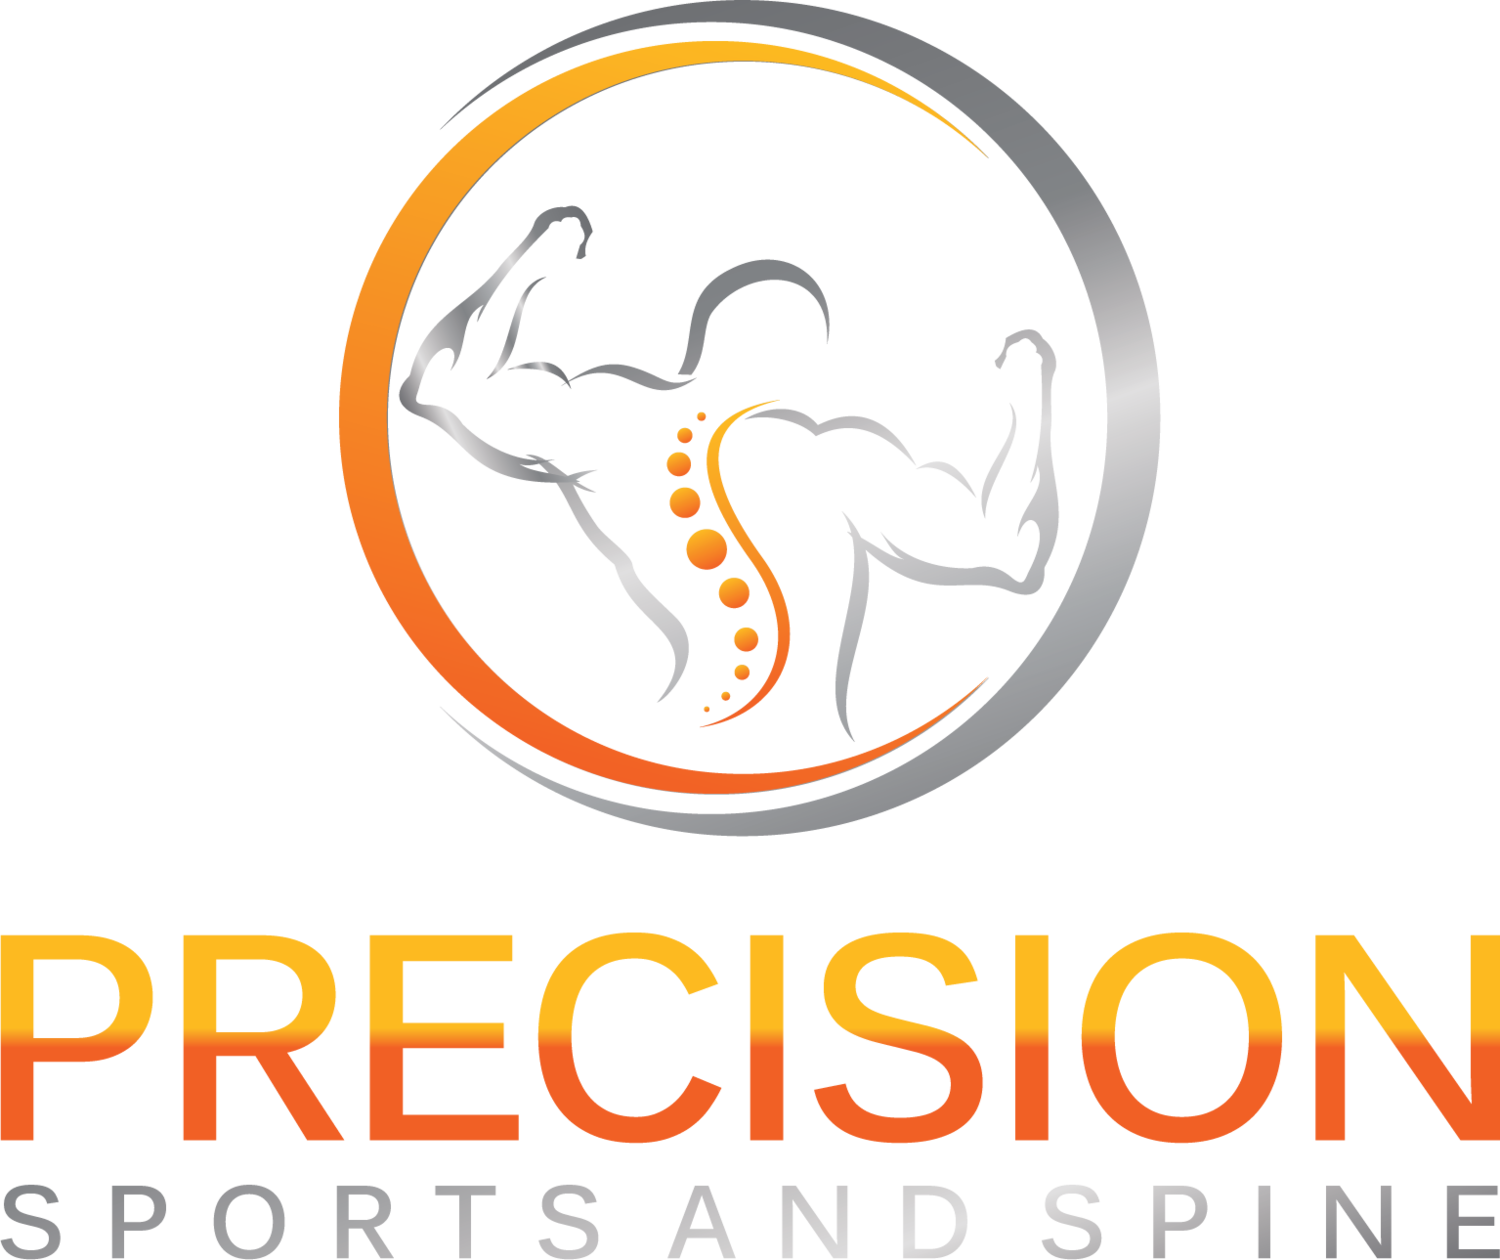 Precision Sports and Spine